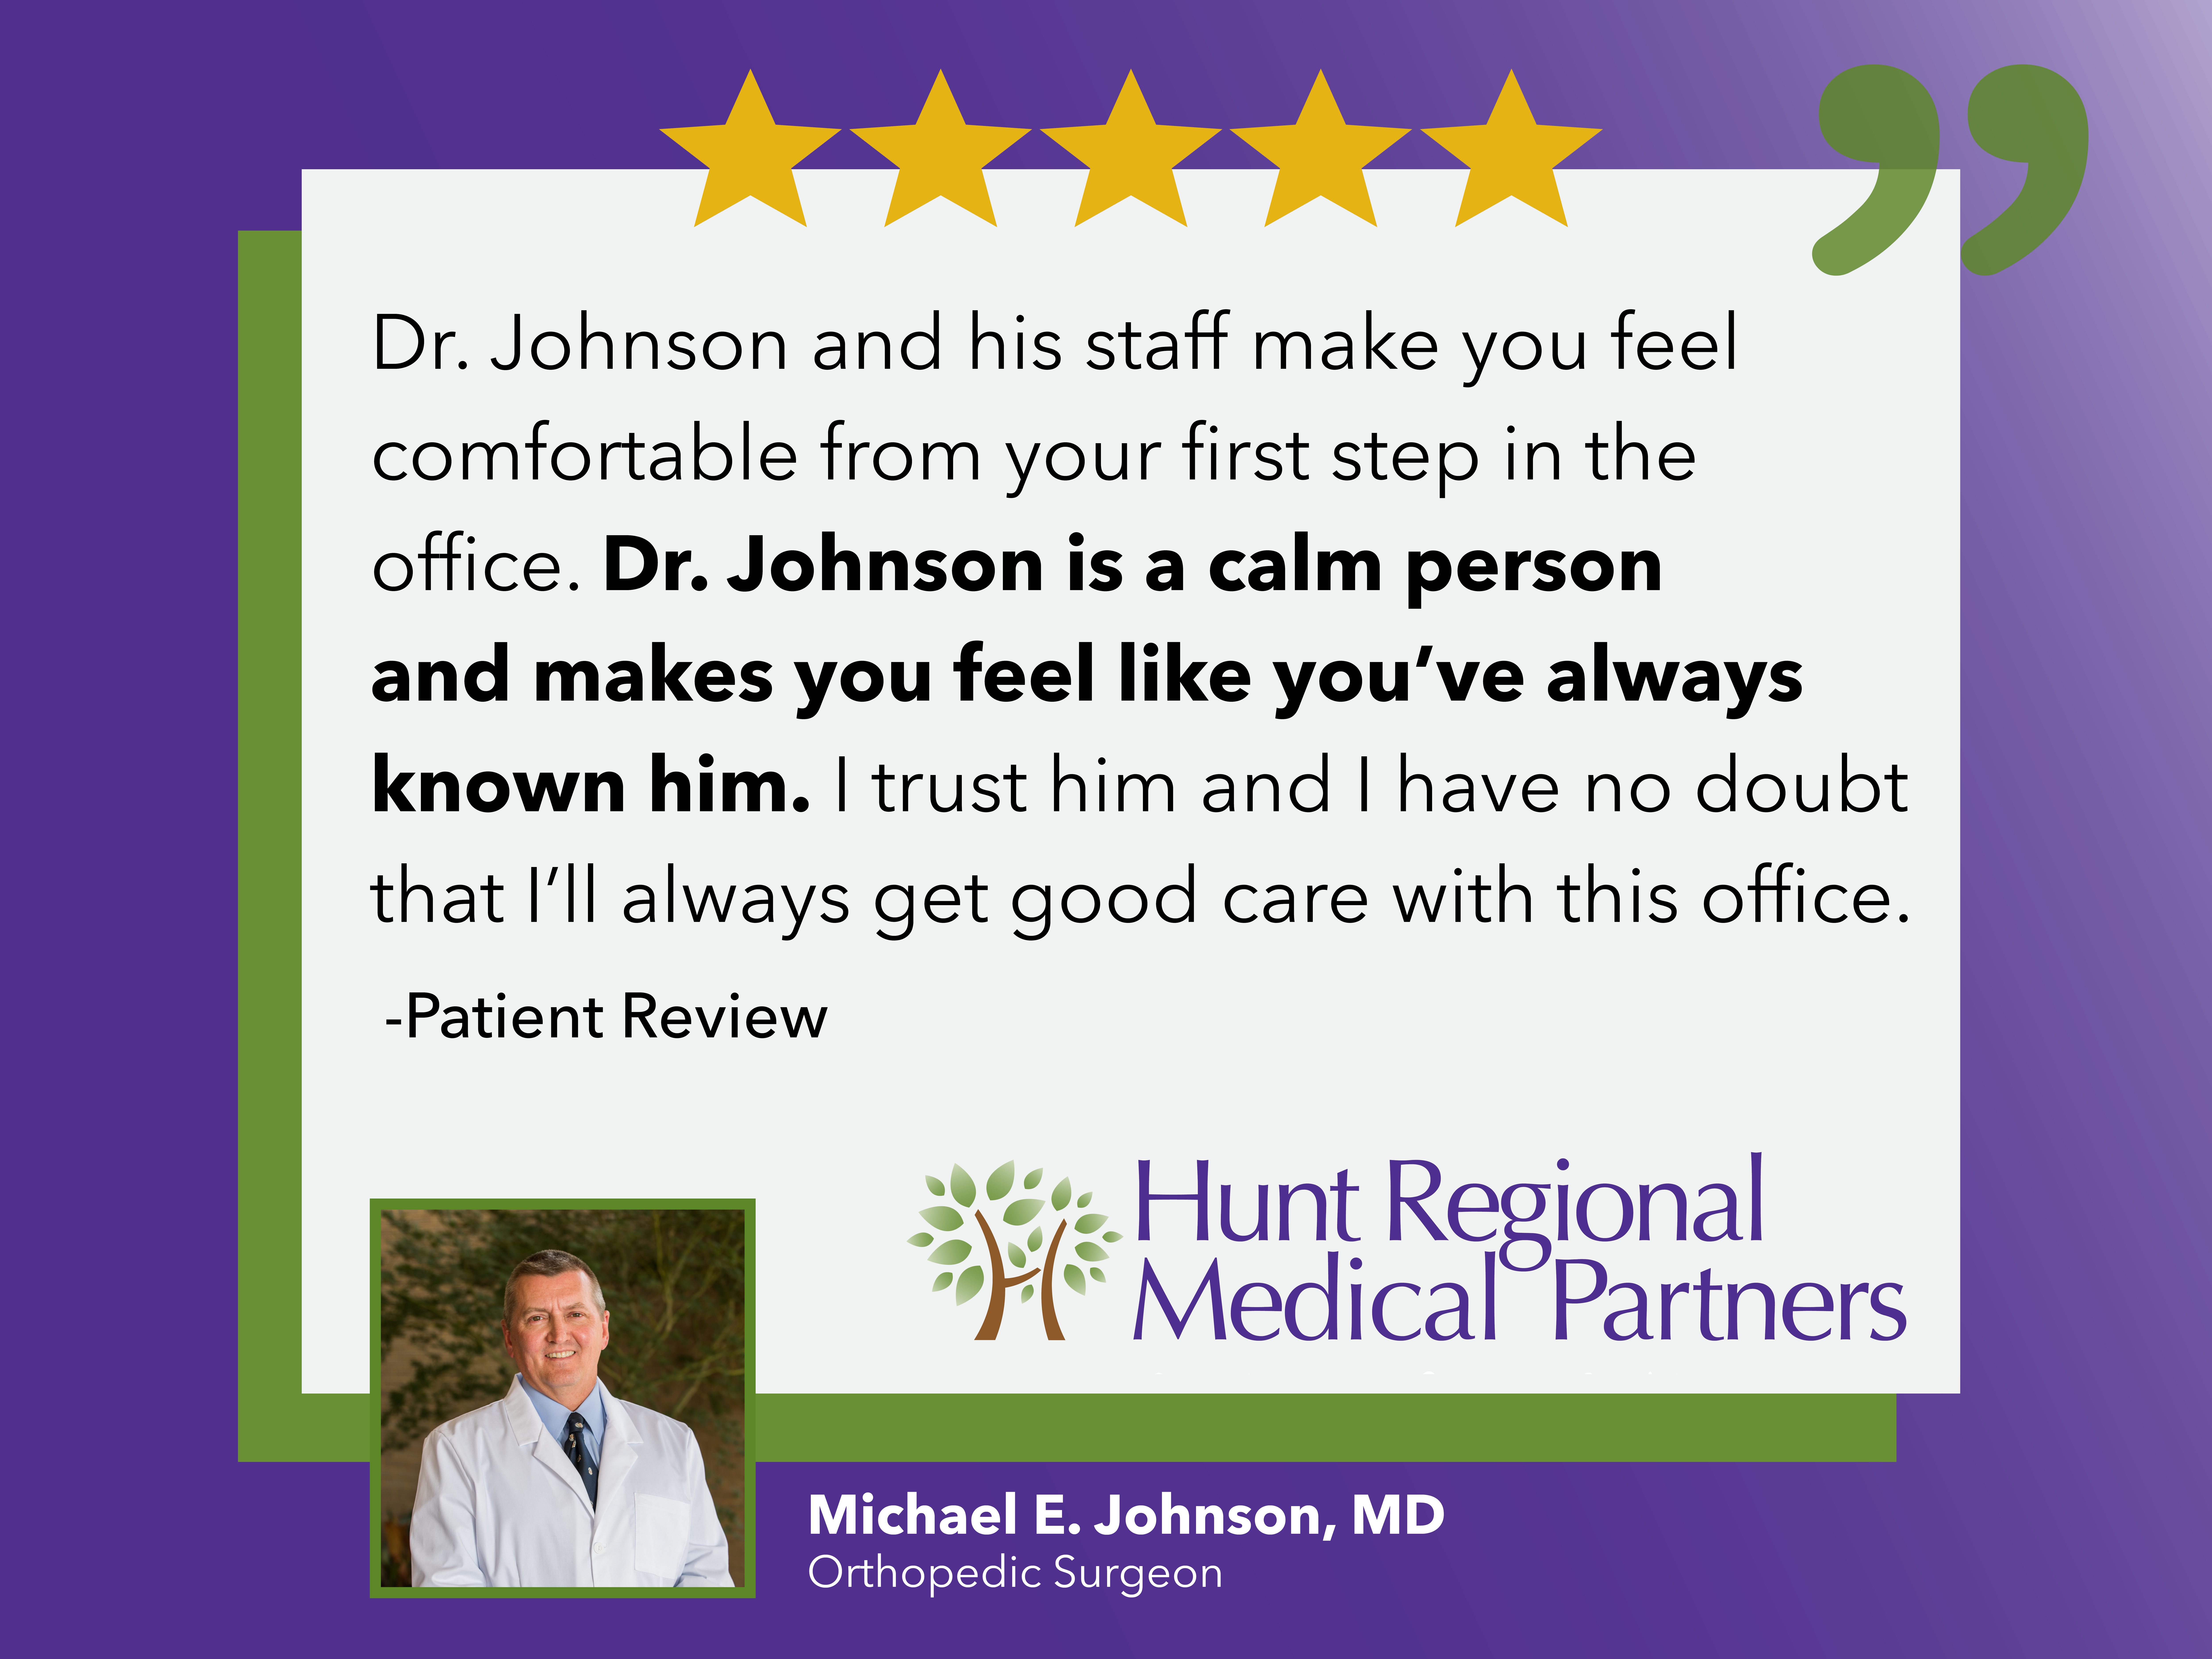 Dr. Johnson and his staff make you feel comfortable from your first step in the office. Dr. Johnson is a calm person and makes feel like you've always known him. I trust him and I have no doubt that I'll always get good care with his office.